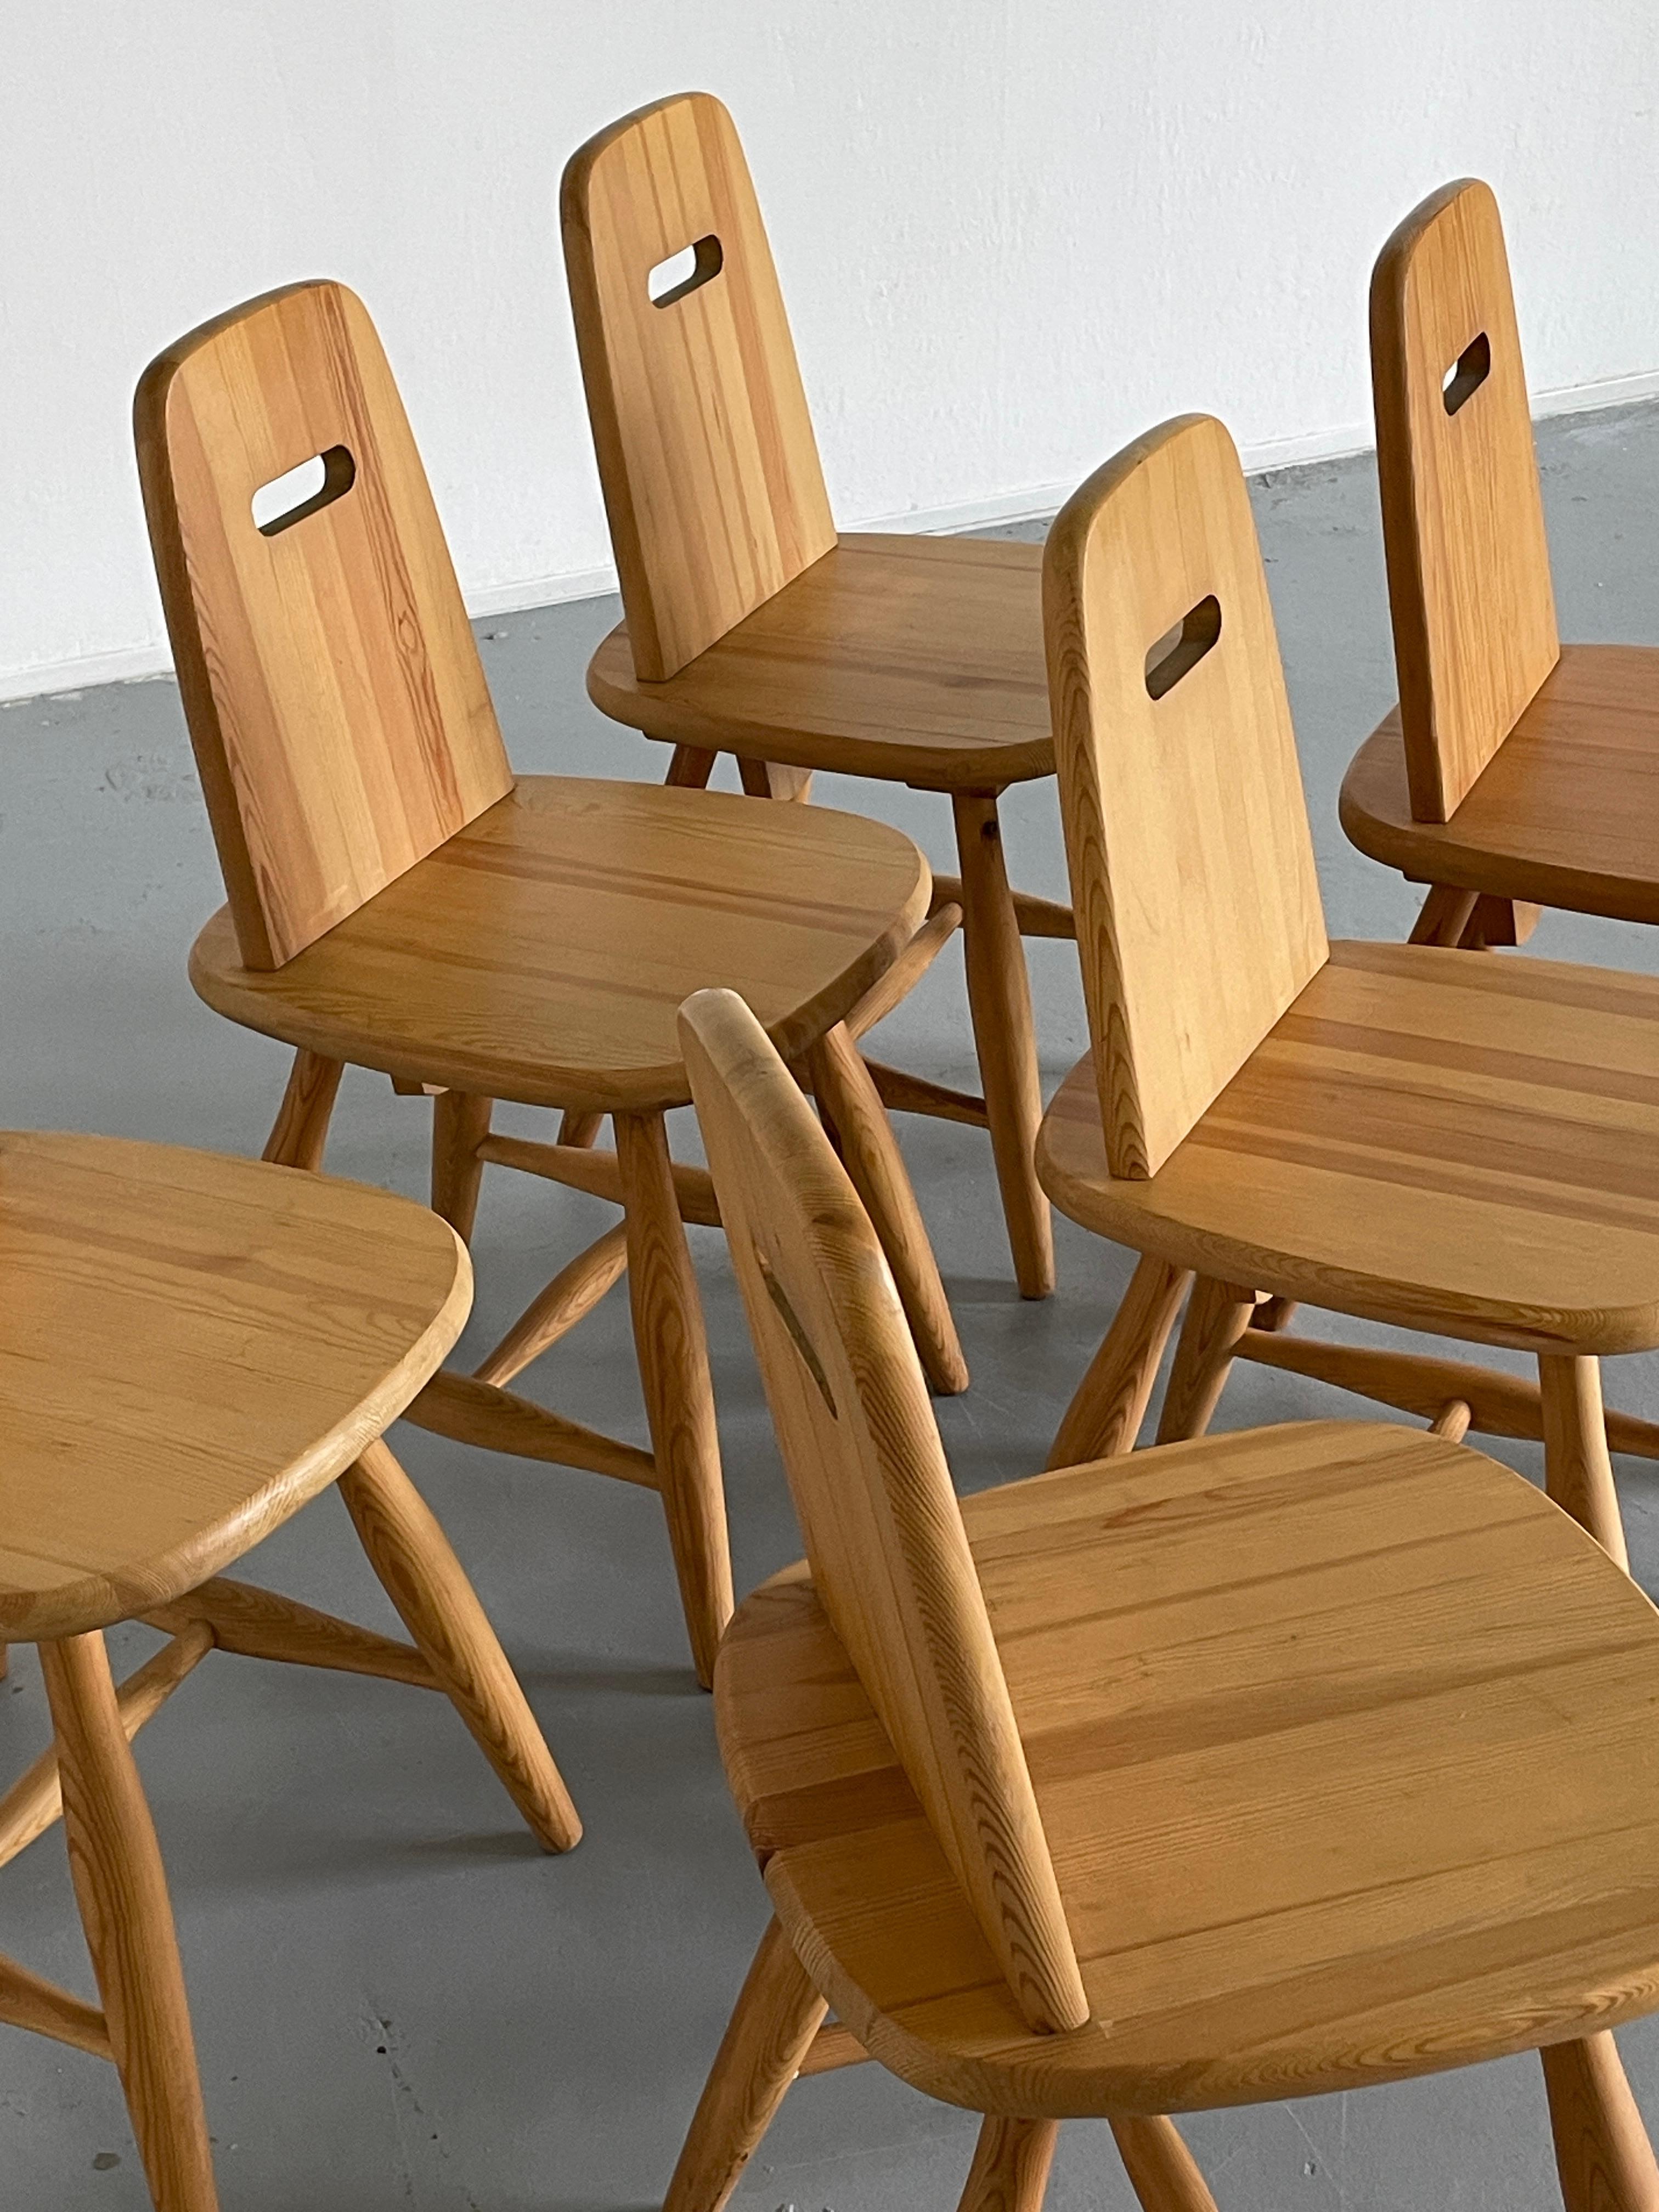 Set of 6 Eero Aarnio 'Pirtti' Wooden Dining Chairs in Solid Pine for Laukaan Puu 6